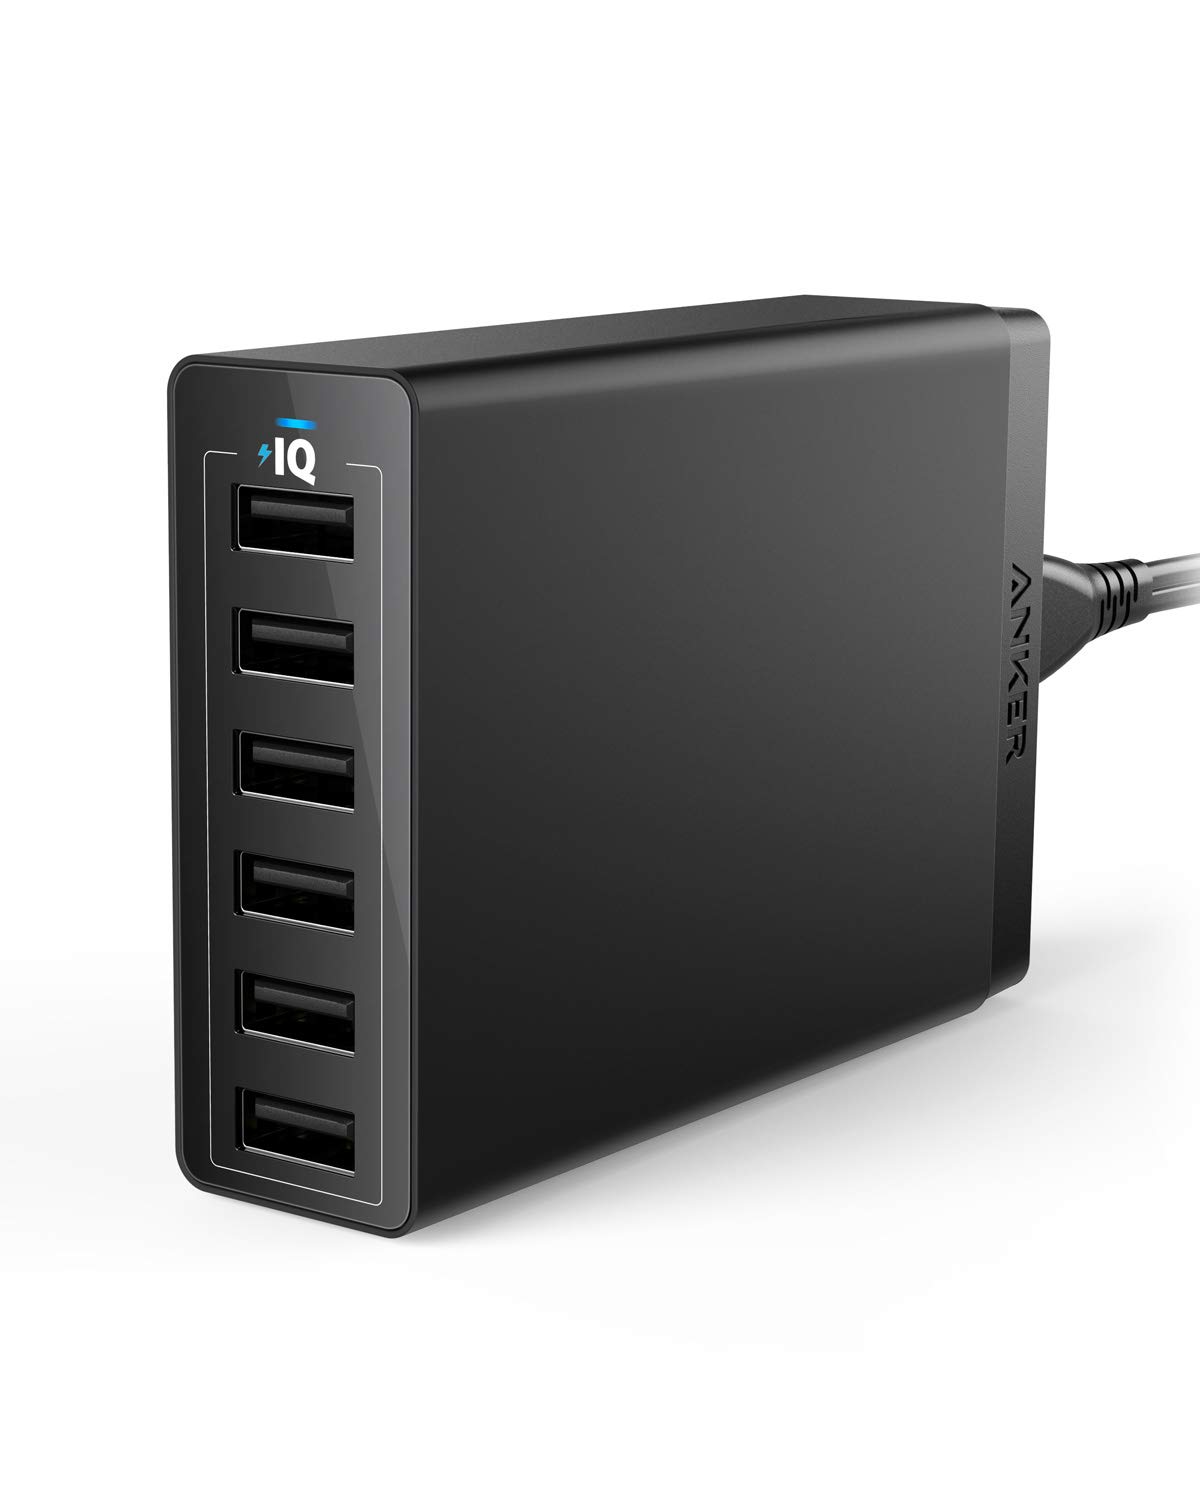 Anker Charger, 60W 6 Port Charging Station, PowerPort 6 Multi USB Charger - $19.99